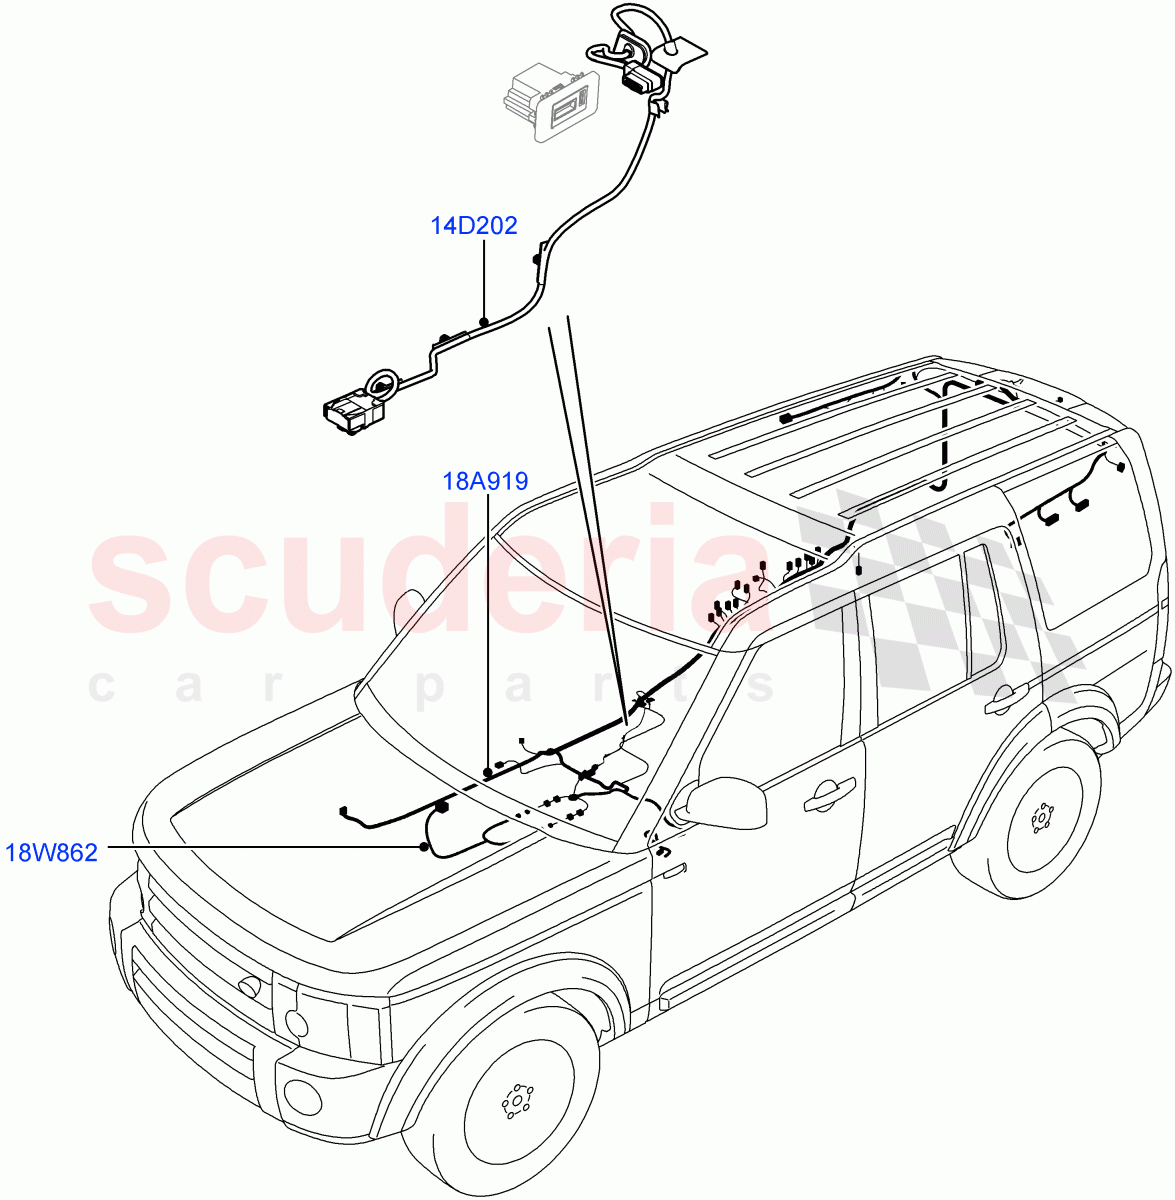 Electrical Wiring - Body And Rear(Audio/Navigation/Entertainment)((V)FROMBA000001,(V)TOBA999999) of Land Rover Land Rover Discovery 4 (2010-2016) [5.0 OHC SGDI NA V8 Petrol]